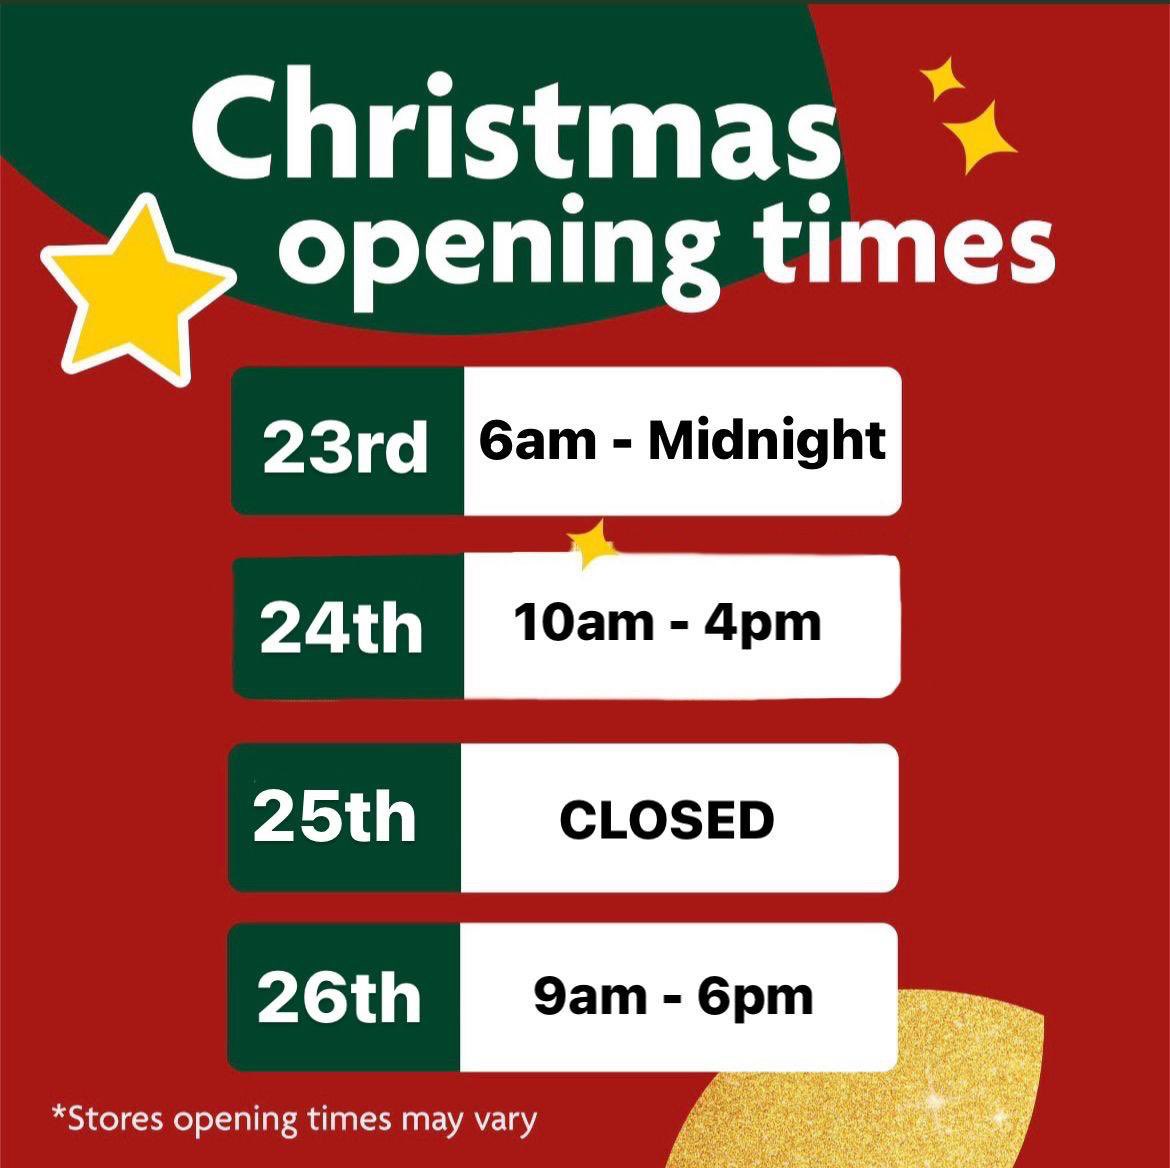 🎄Our Christmas opening times 🎄We are open till midnight tonight to help you stock up on your festive favourites. #MoreReasons